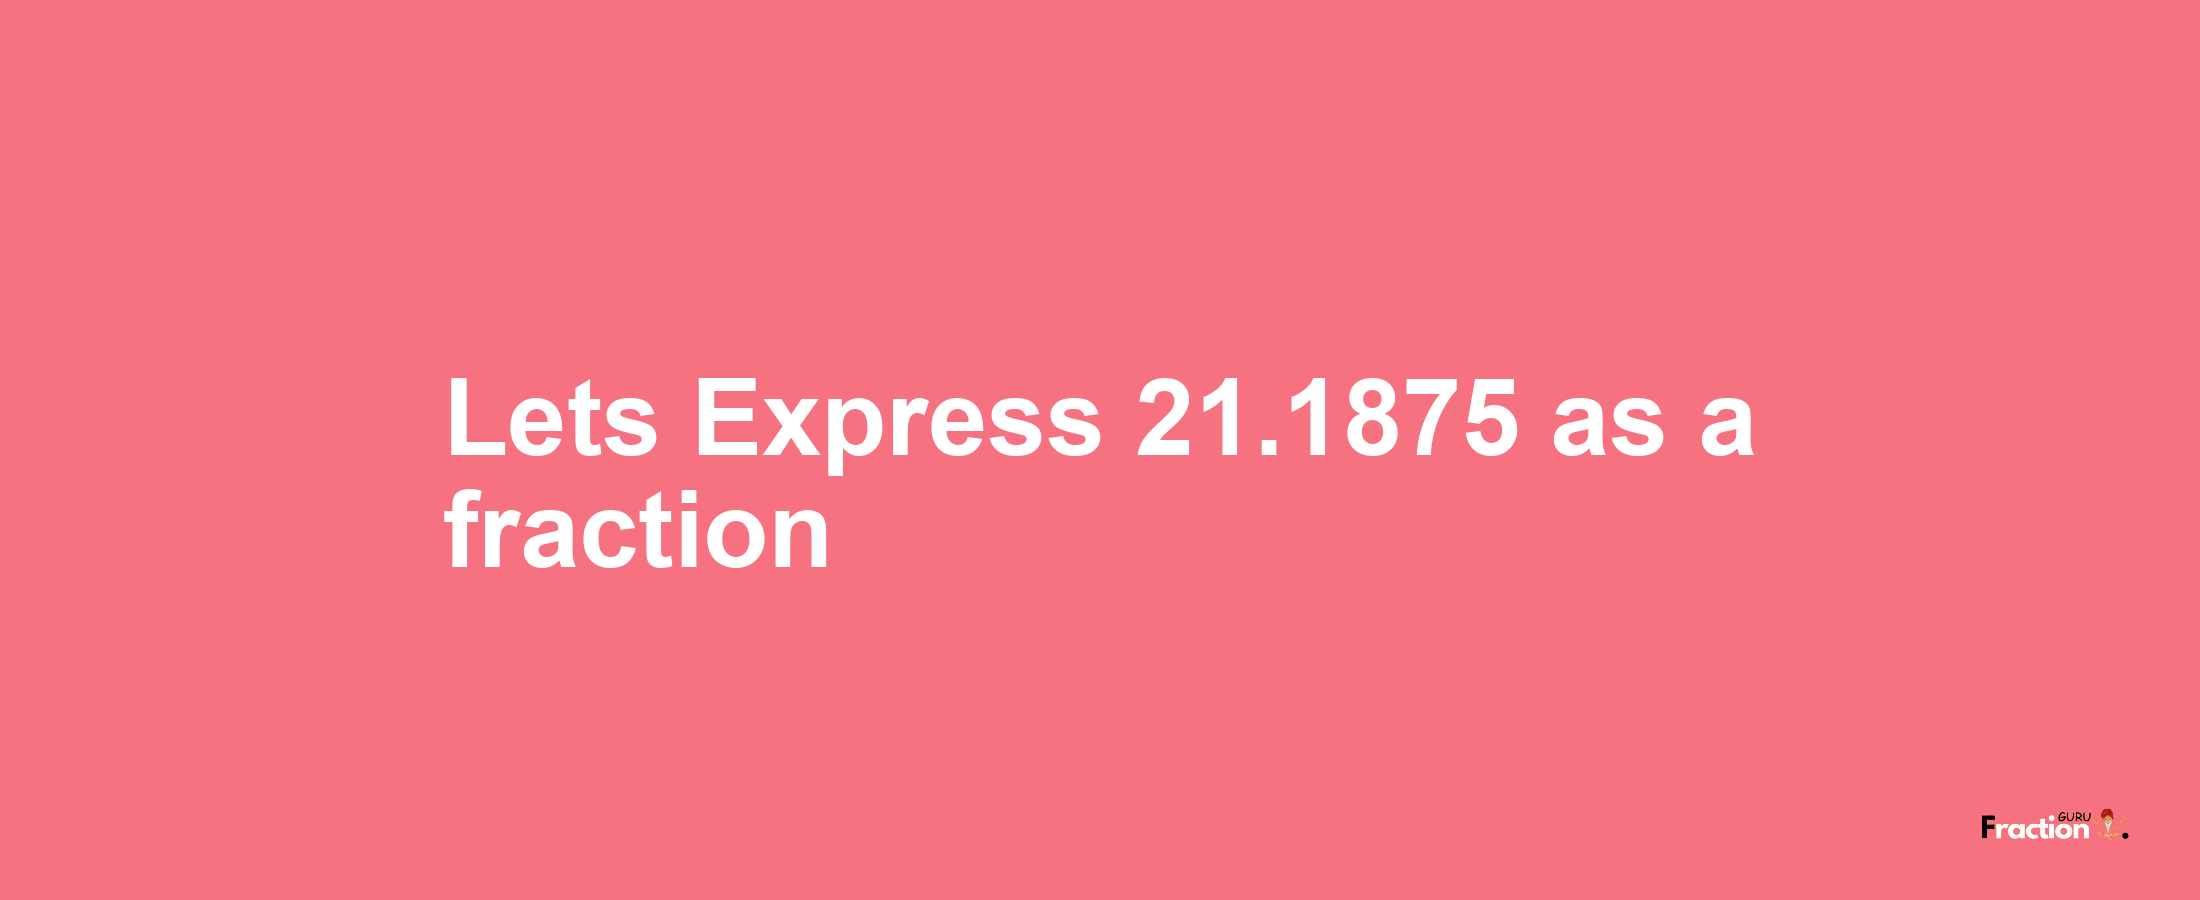 Lets Express 21.1875 as afraction